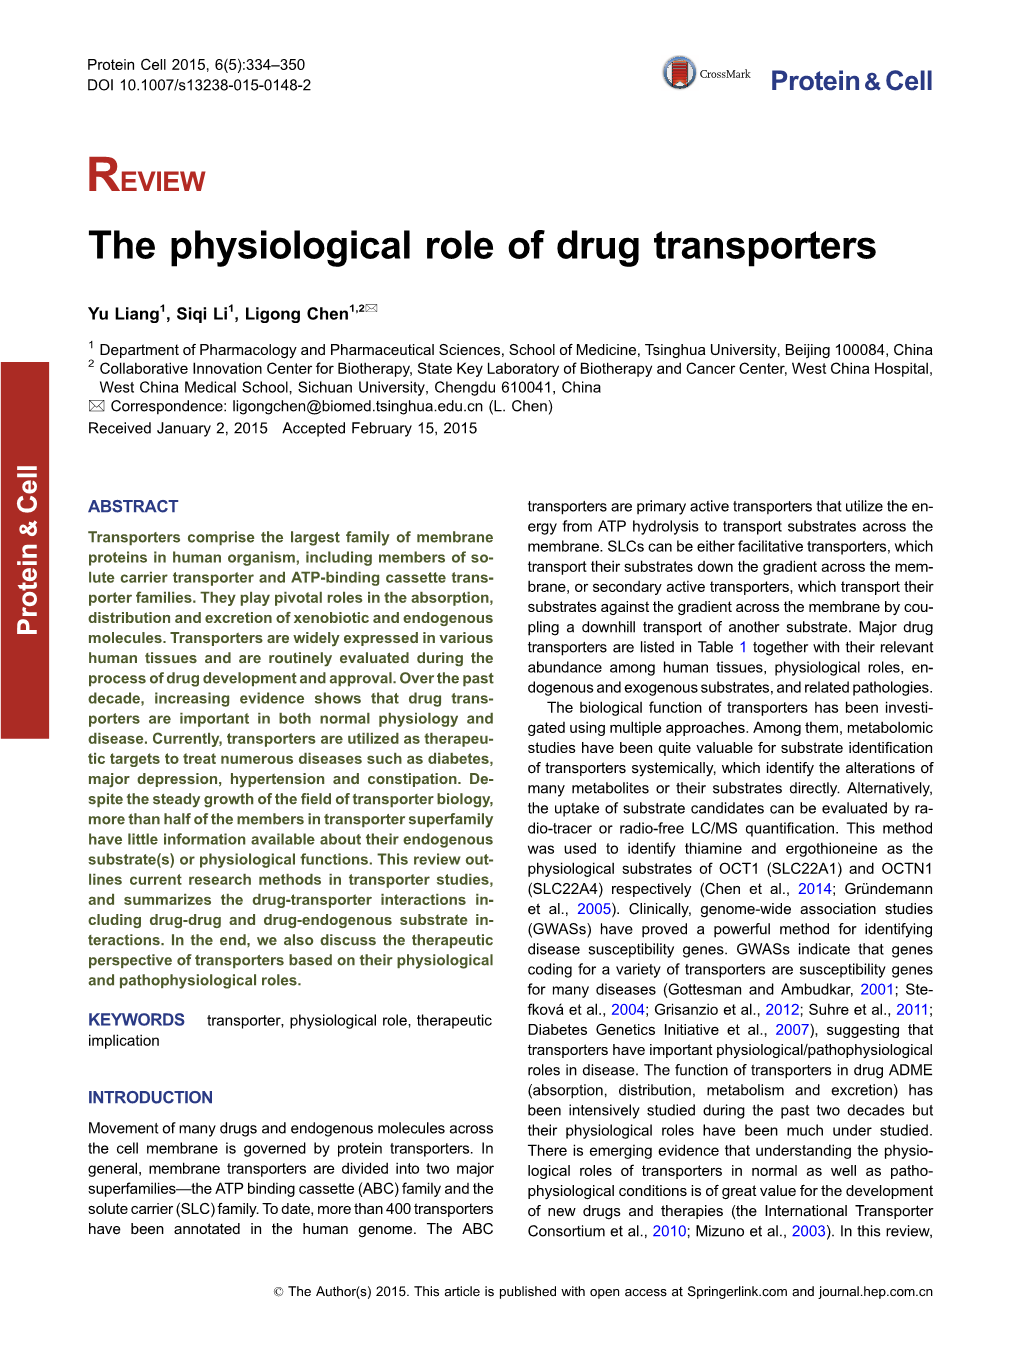 The Physiological Role of Drug Transporters